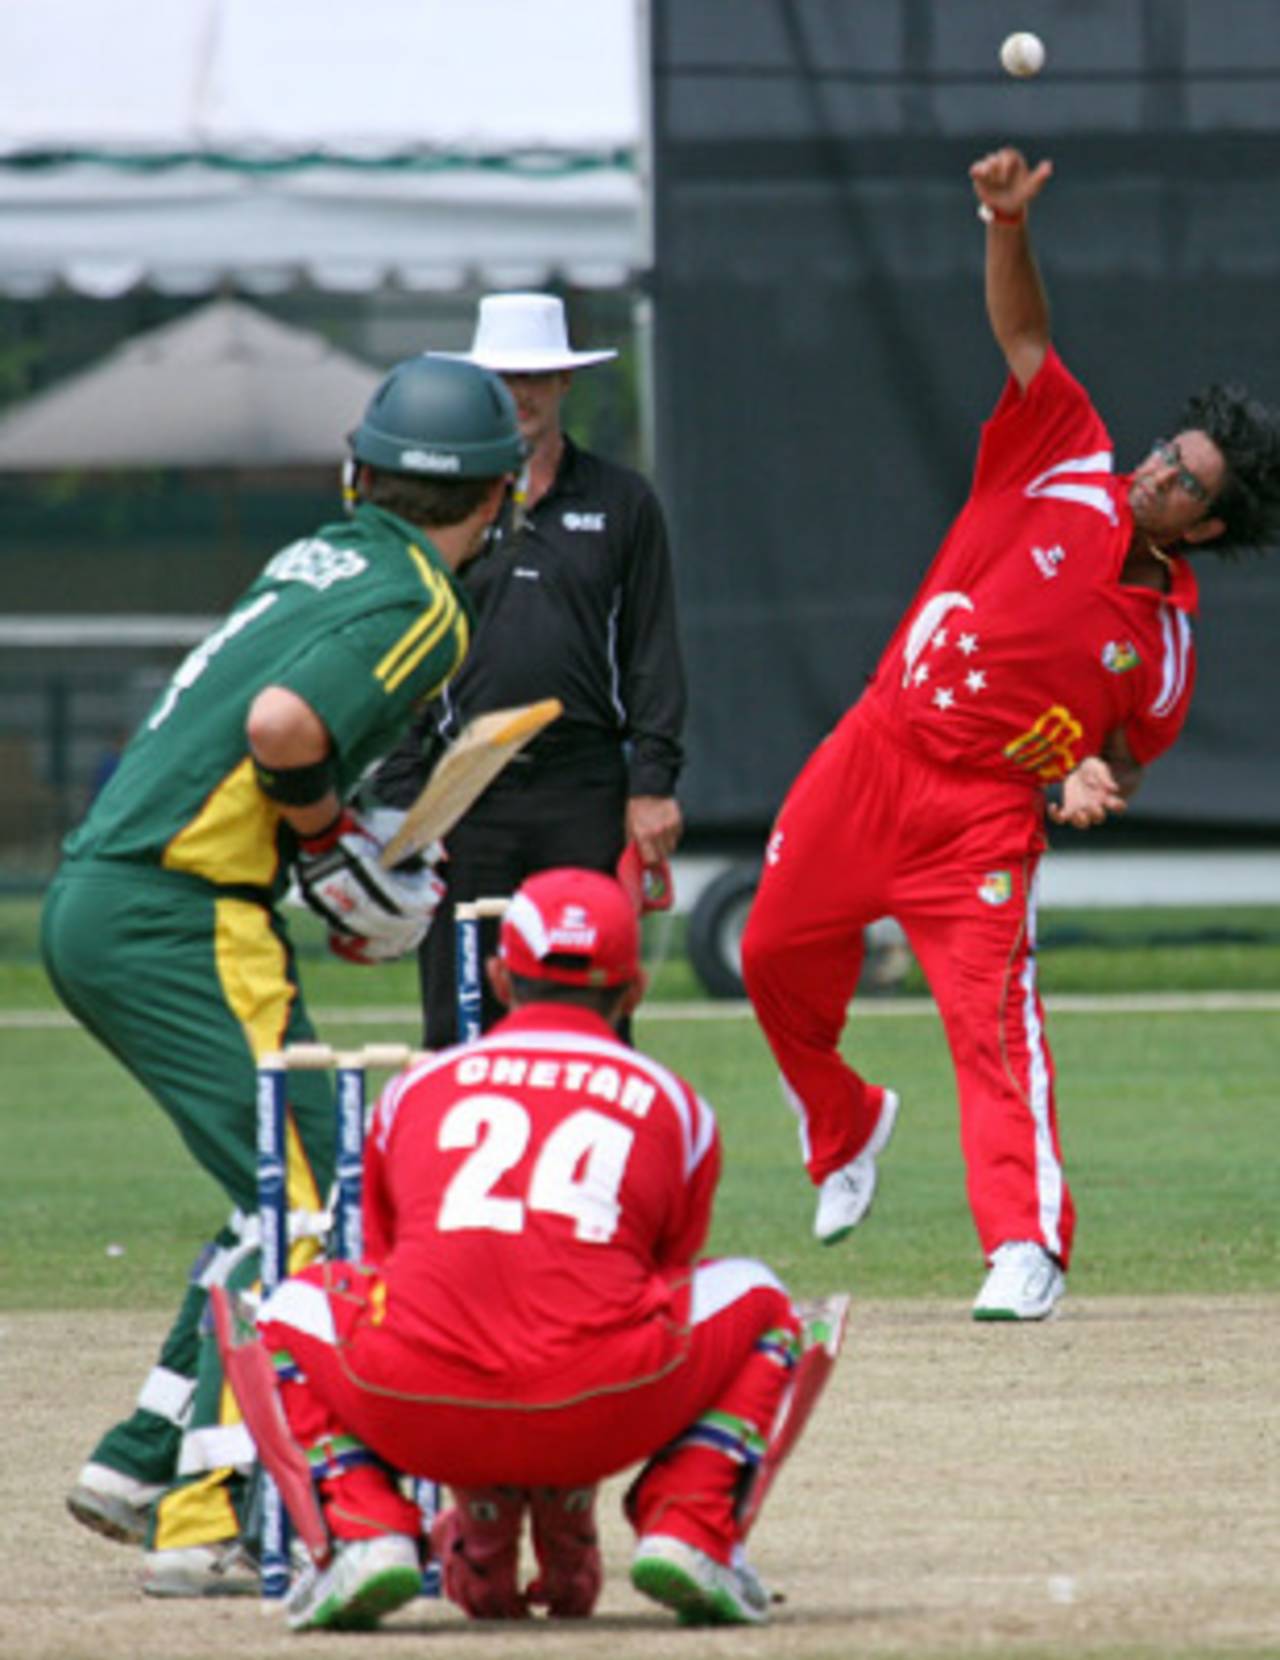 Mulewa Dharmichand in action for Singapore, Singapore v Guernsey, ICC World Cricket League Division Six, Singapore, August 29, 2009